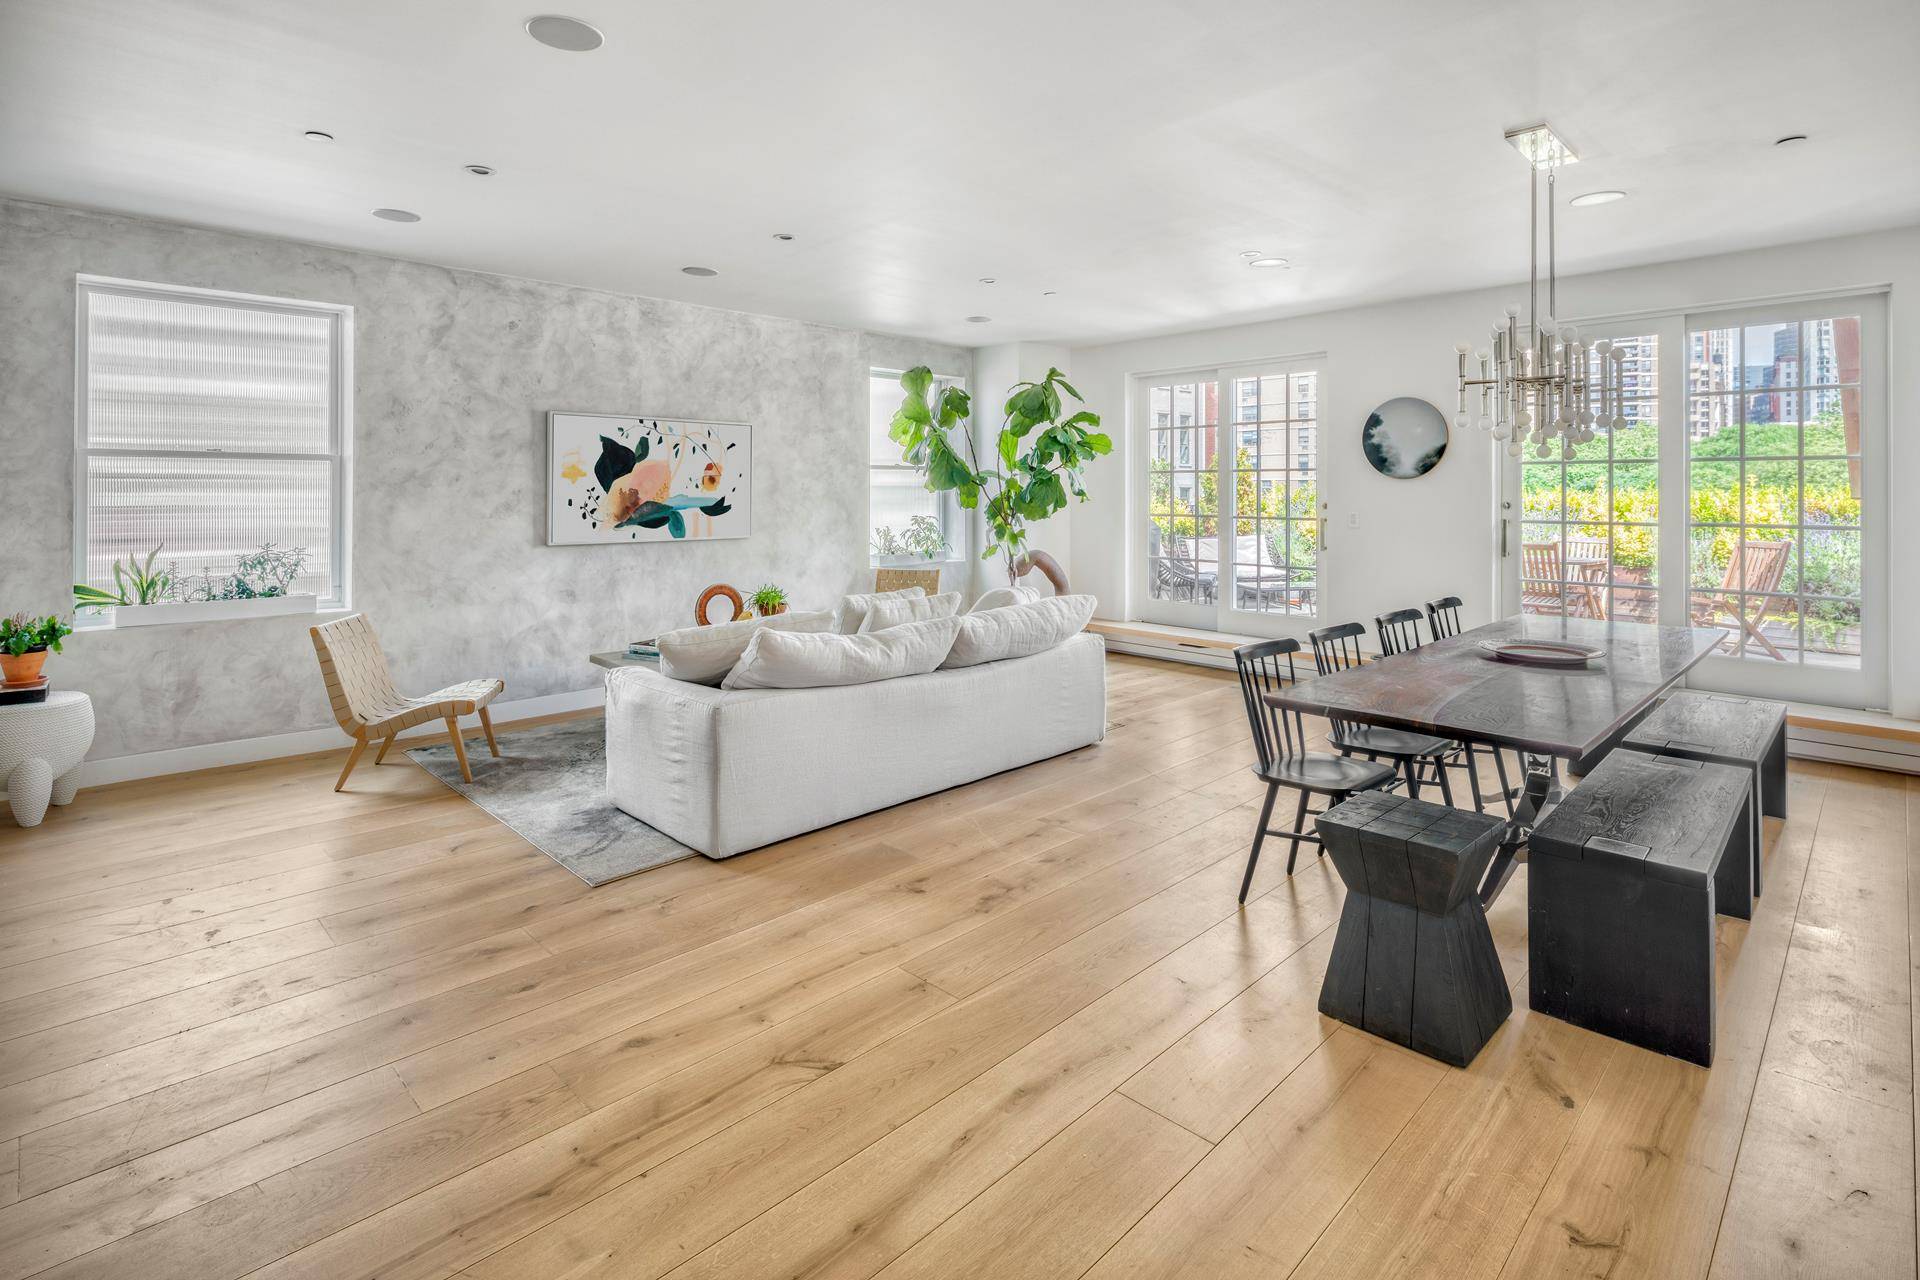 Truly one of a kind, this sun drenched, sprawling duplex condo with dual outdoor spaces is 130 Beekman Street's crown jewel, a gem within the revitalized South Street Seaport.